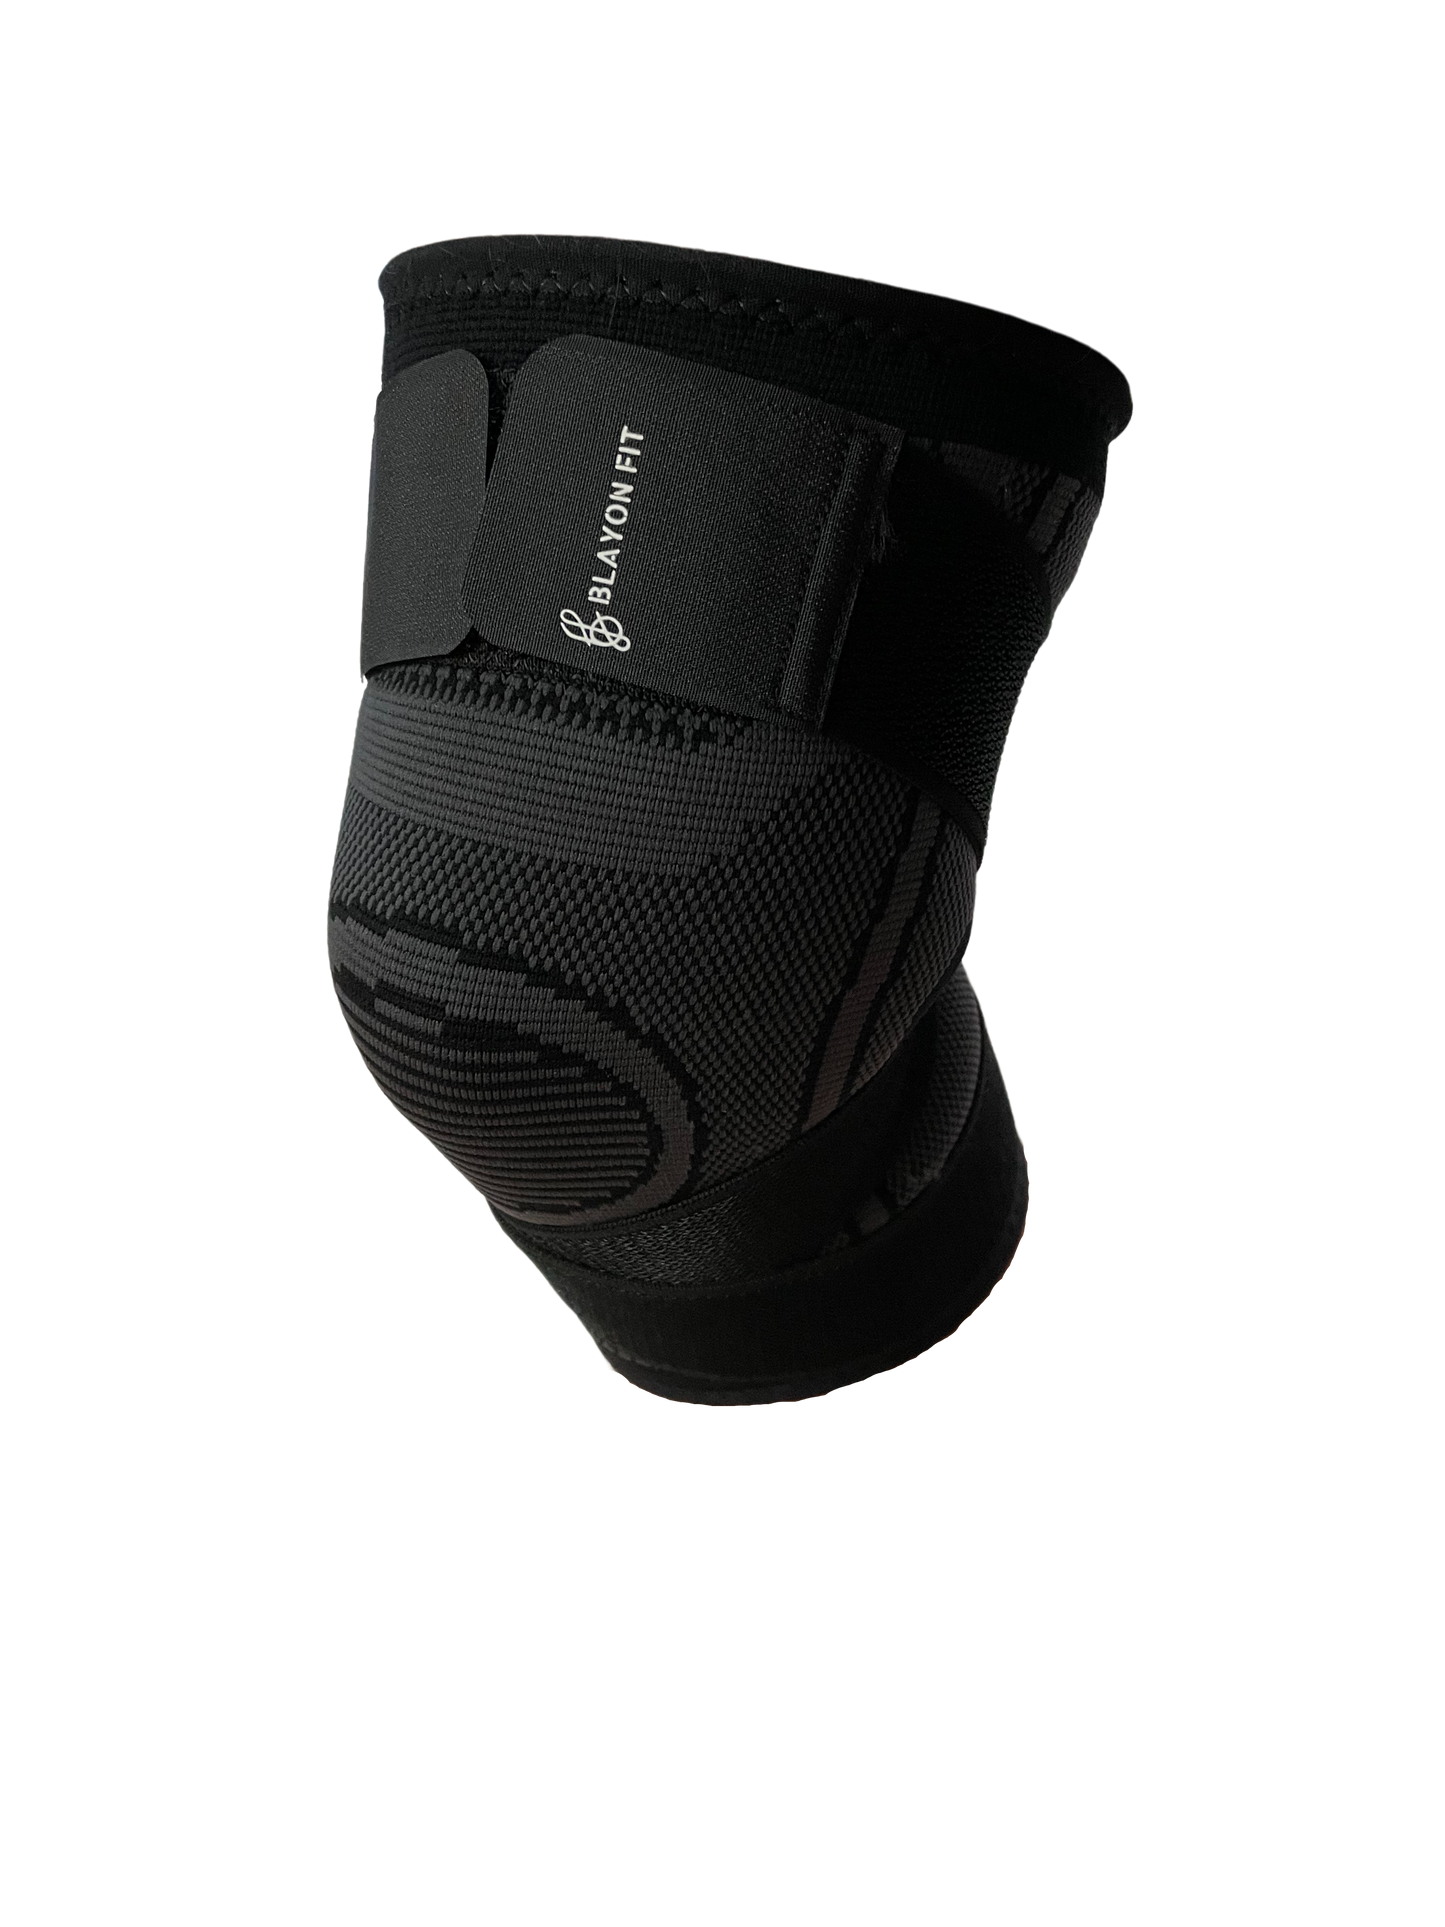 Knee Support Sleeves